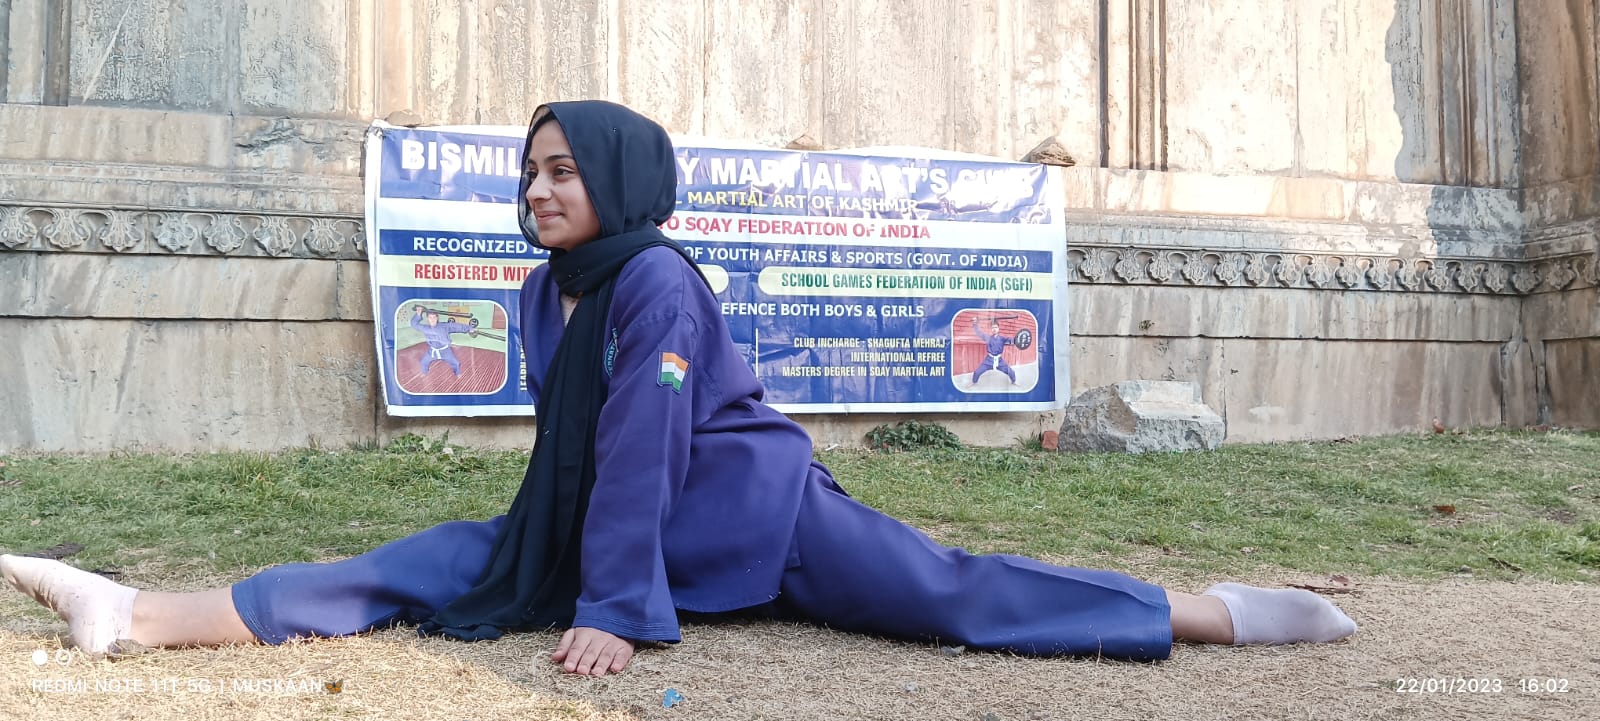 Najm Bilal A 15 years old girl from J&K is making waves in Sqay Martial Arts